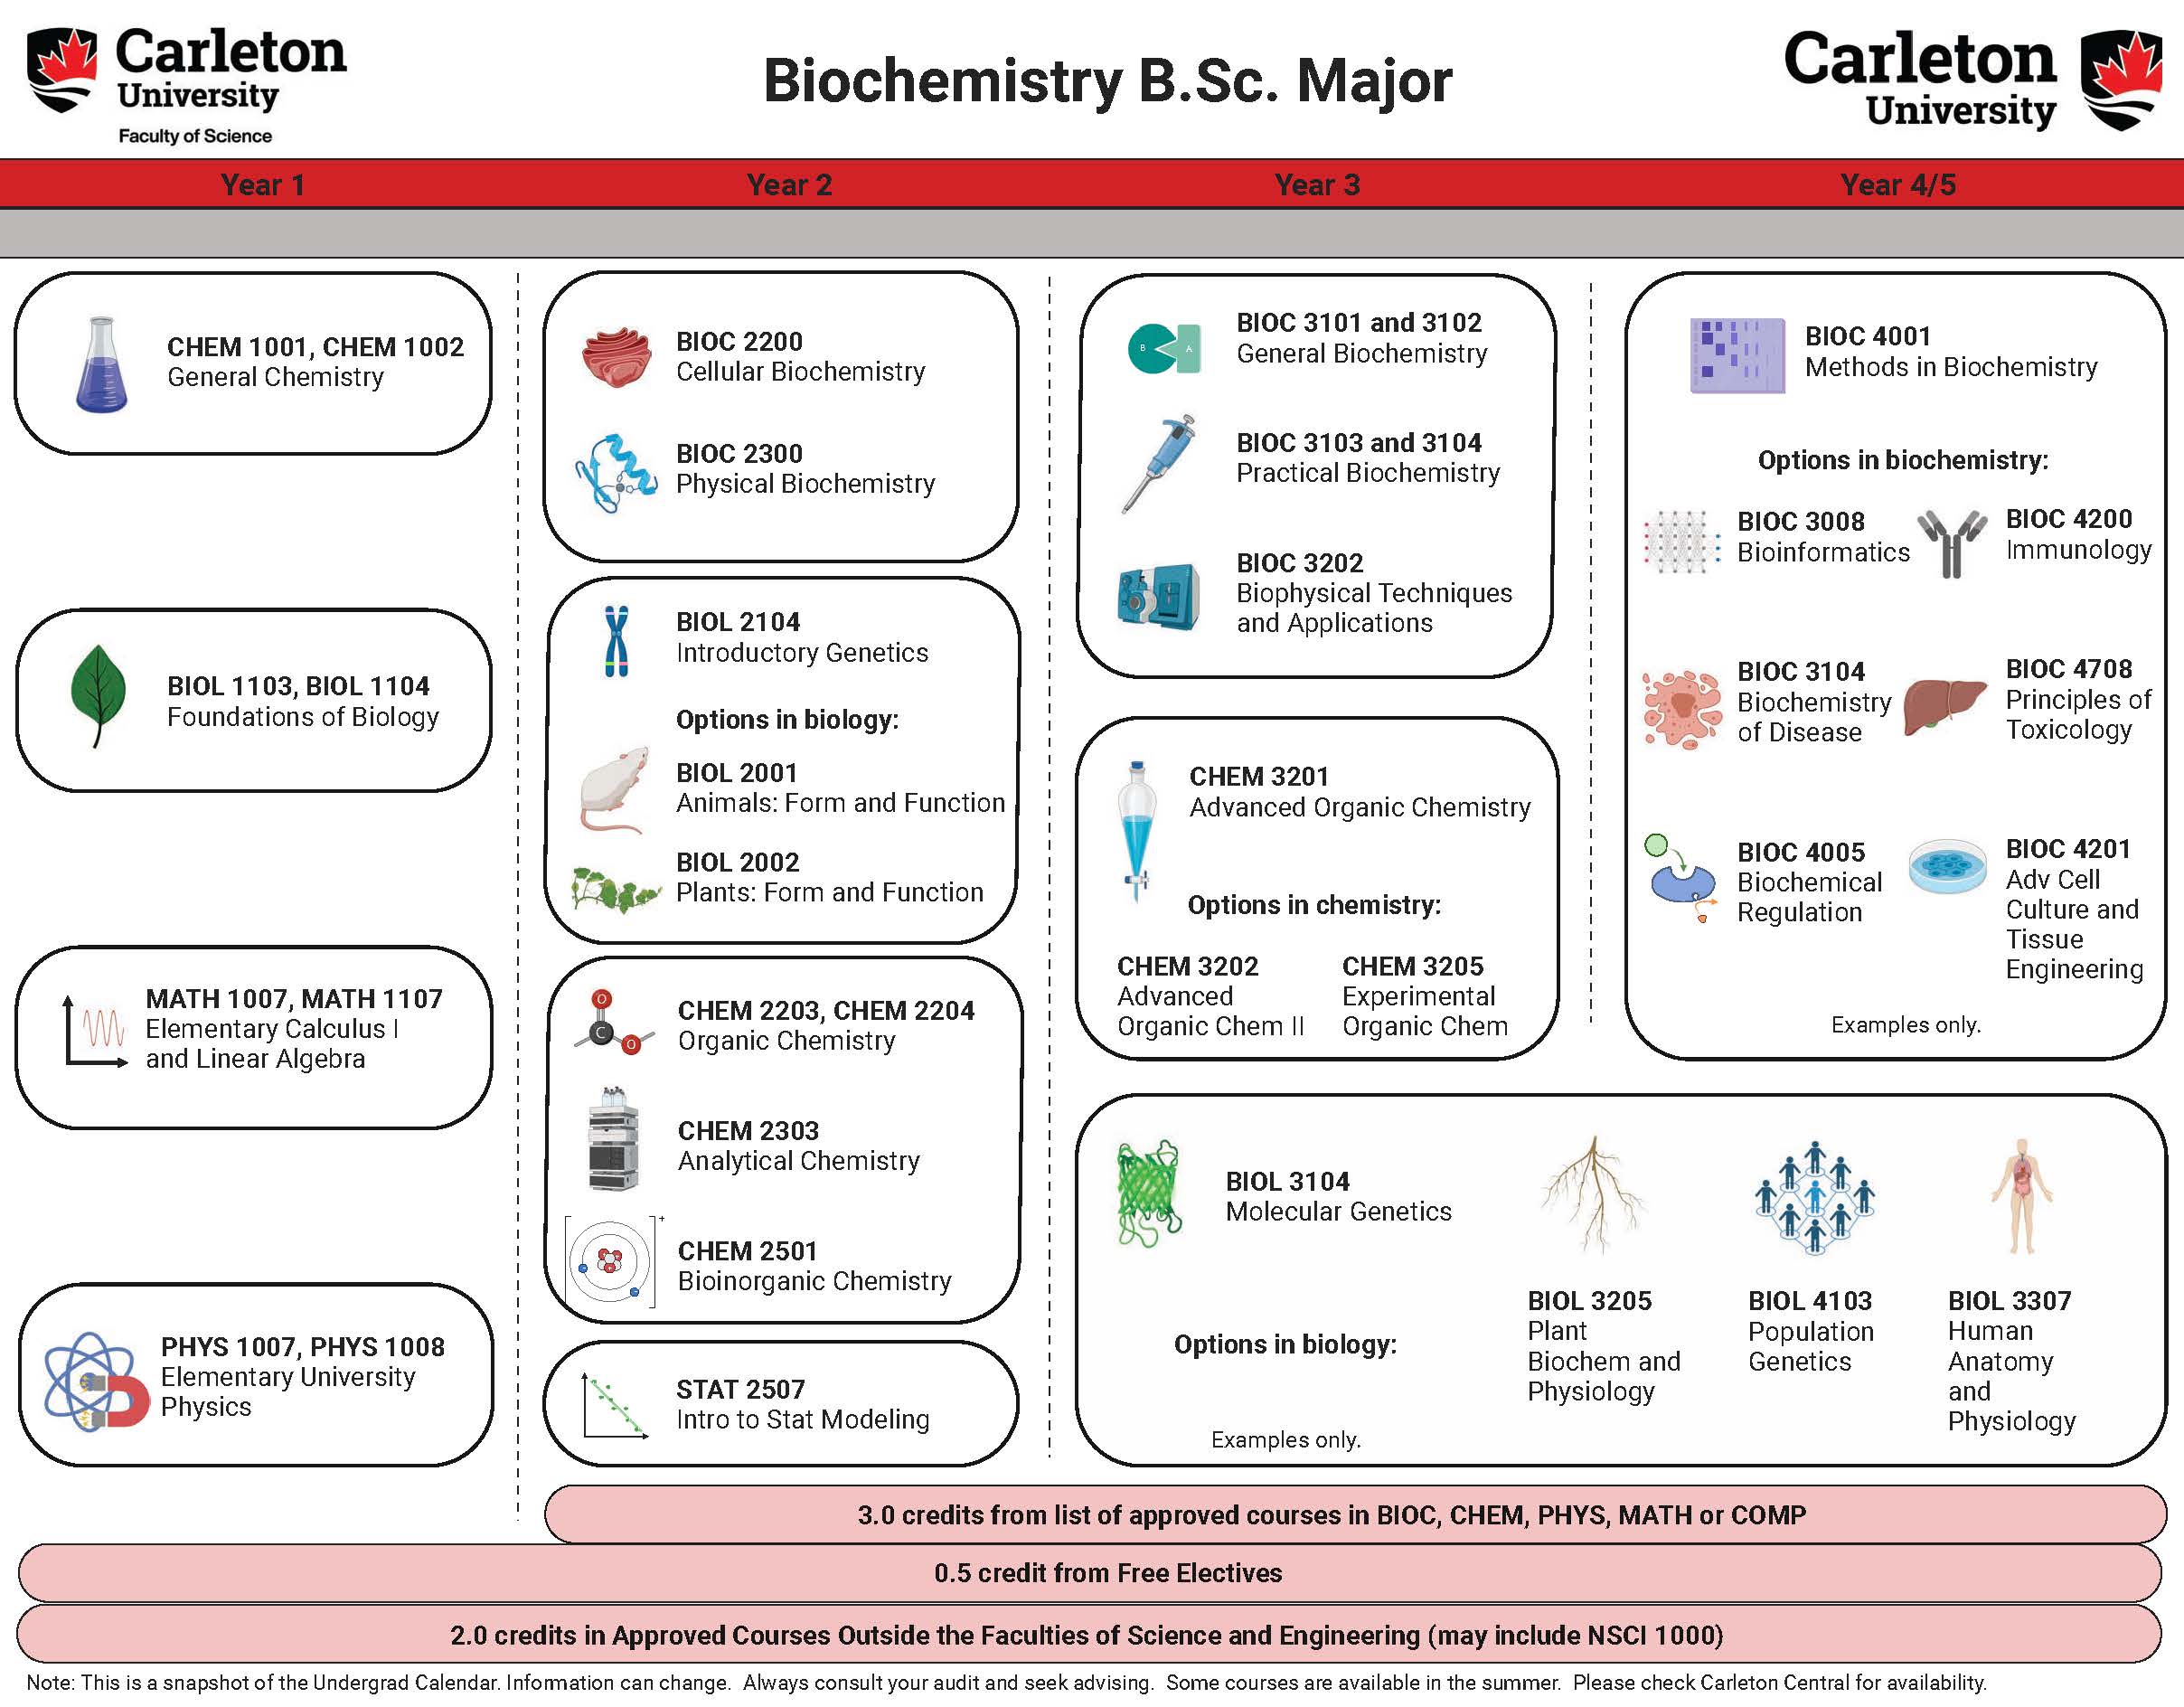 Course Map for Biochemistry BSc. Major.